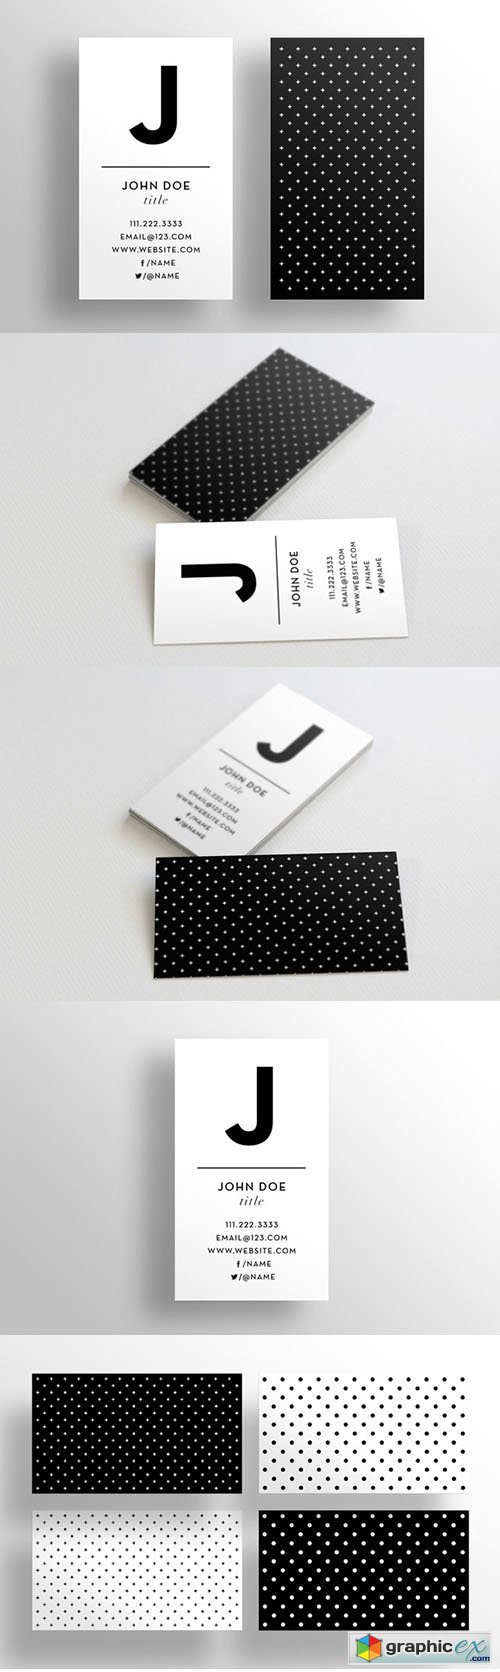  The Initial - Business Card Template